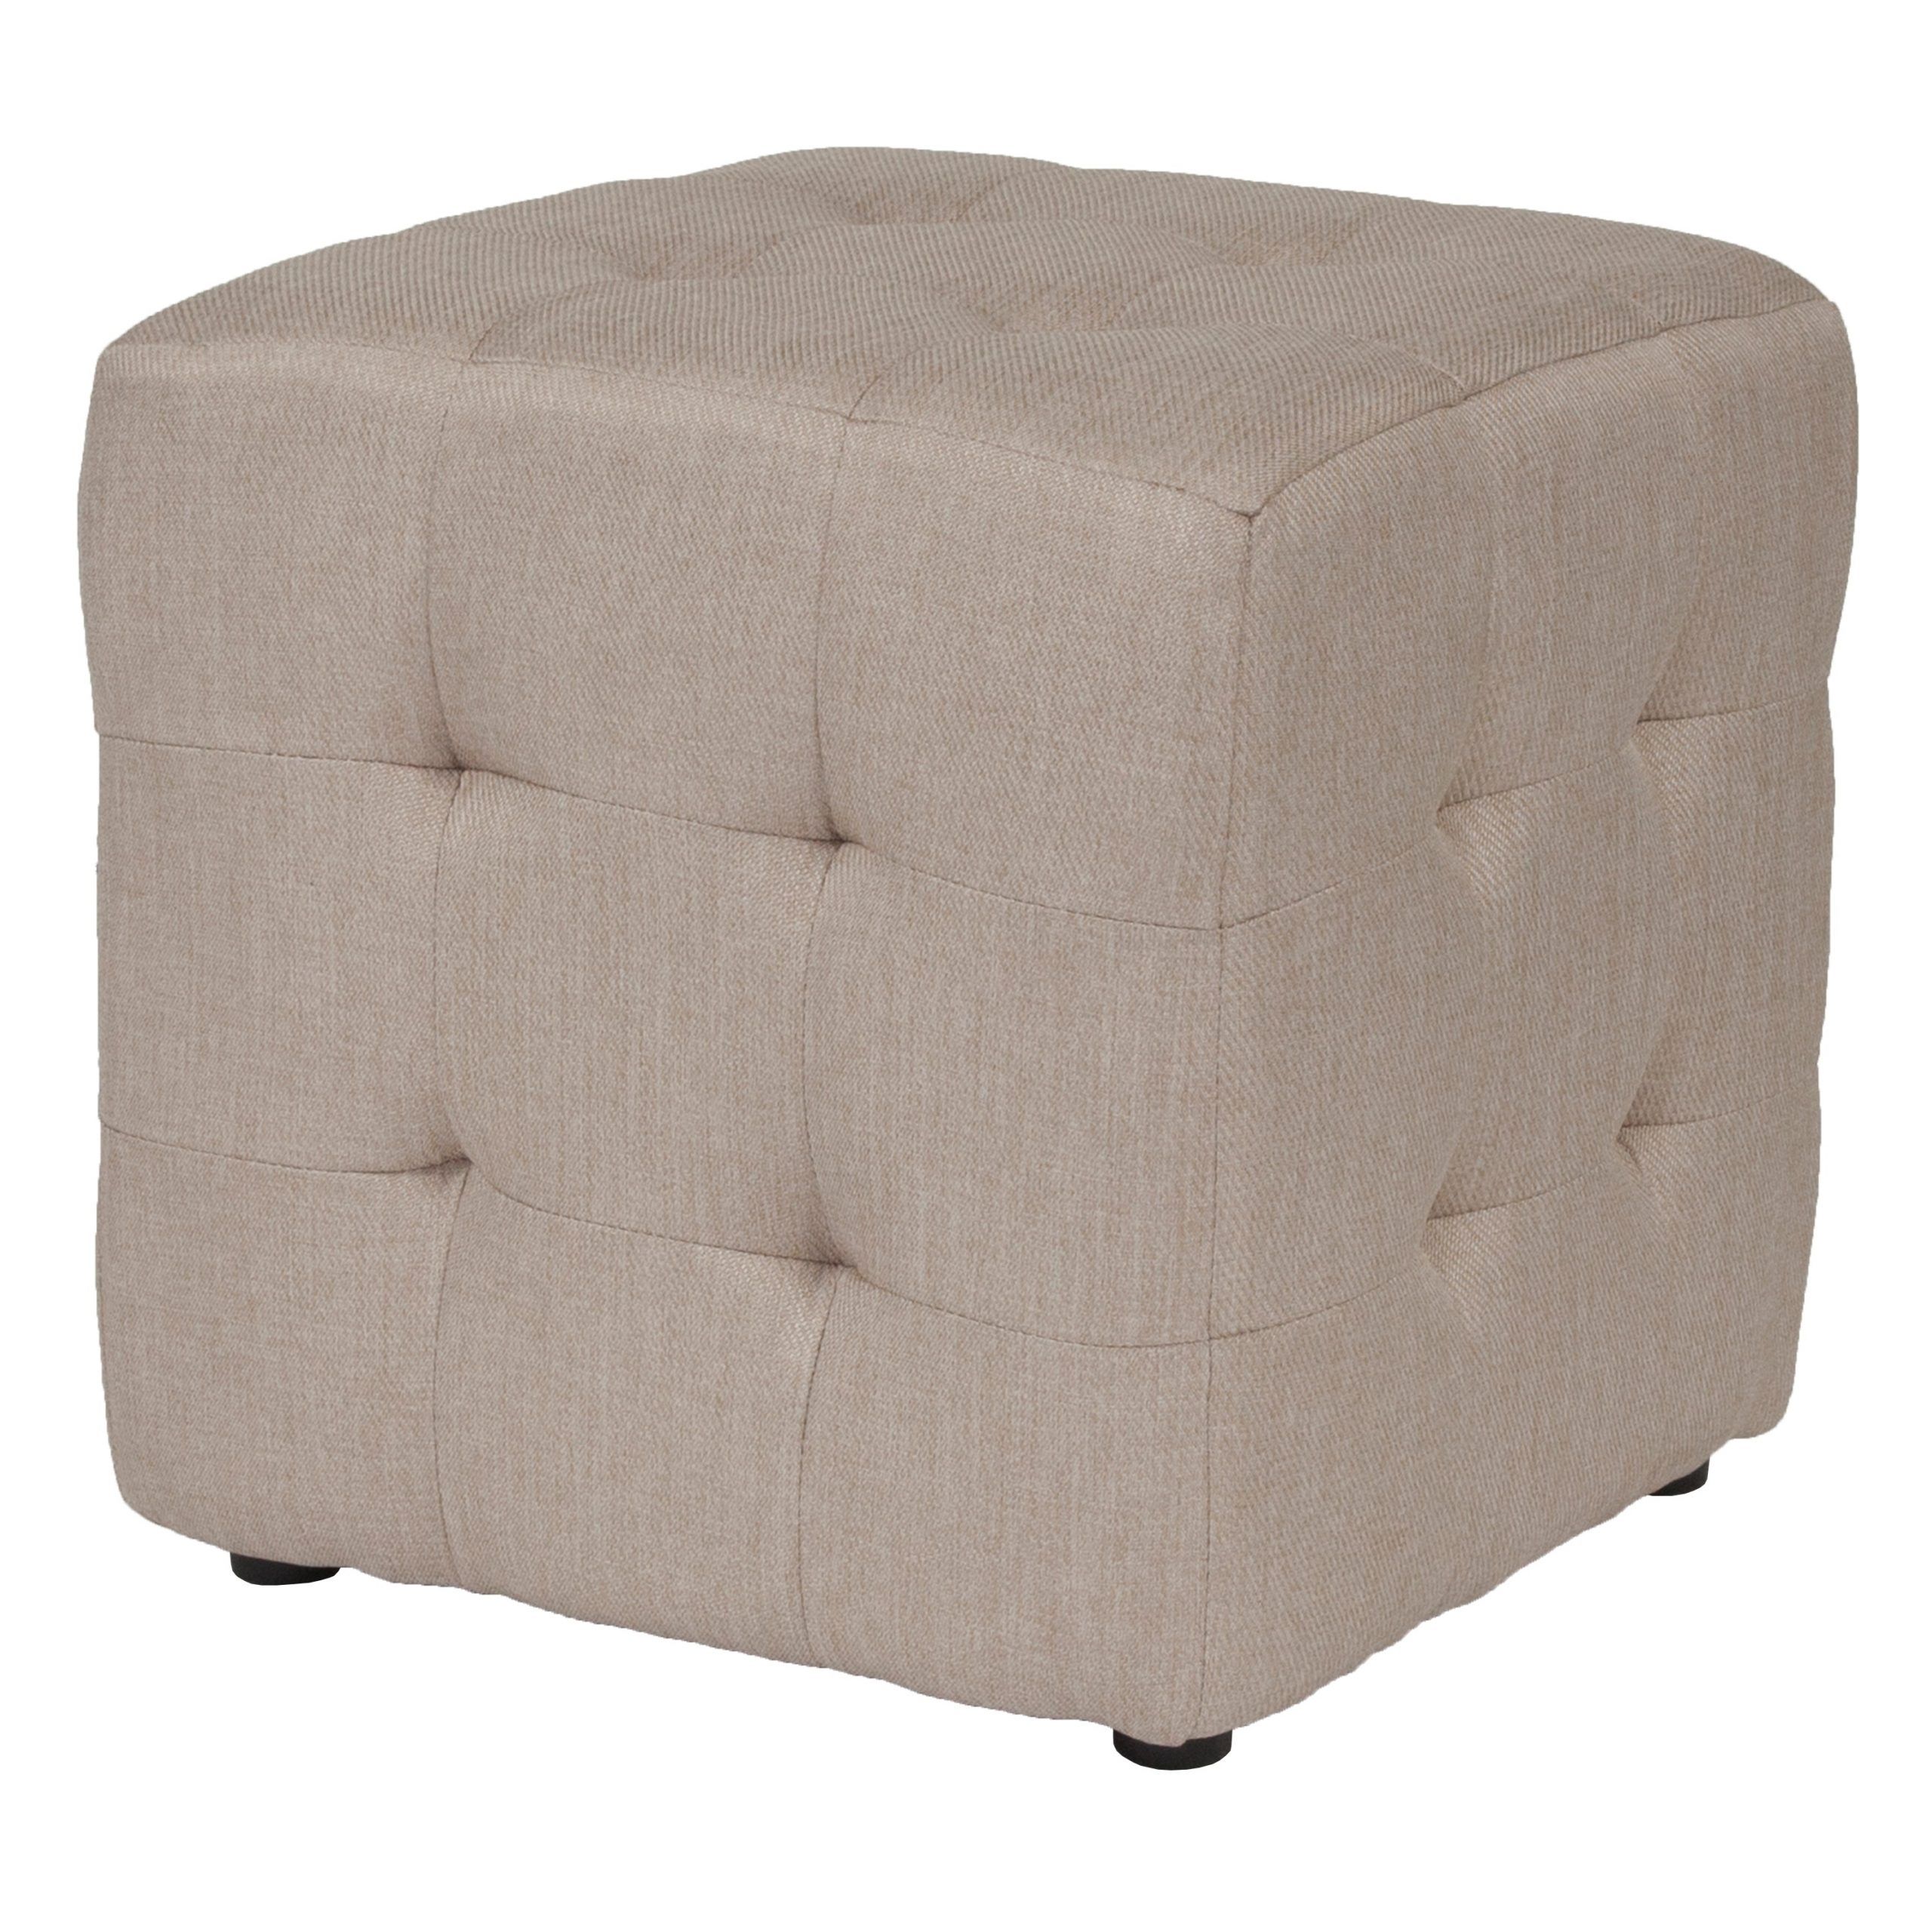 Most Recently Released Bsd National Supplies Ogden Beige Fabric Tufted Upholstered Cube For Gray Fabric Tufted Oval Ottomans (View 7 of 10)